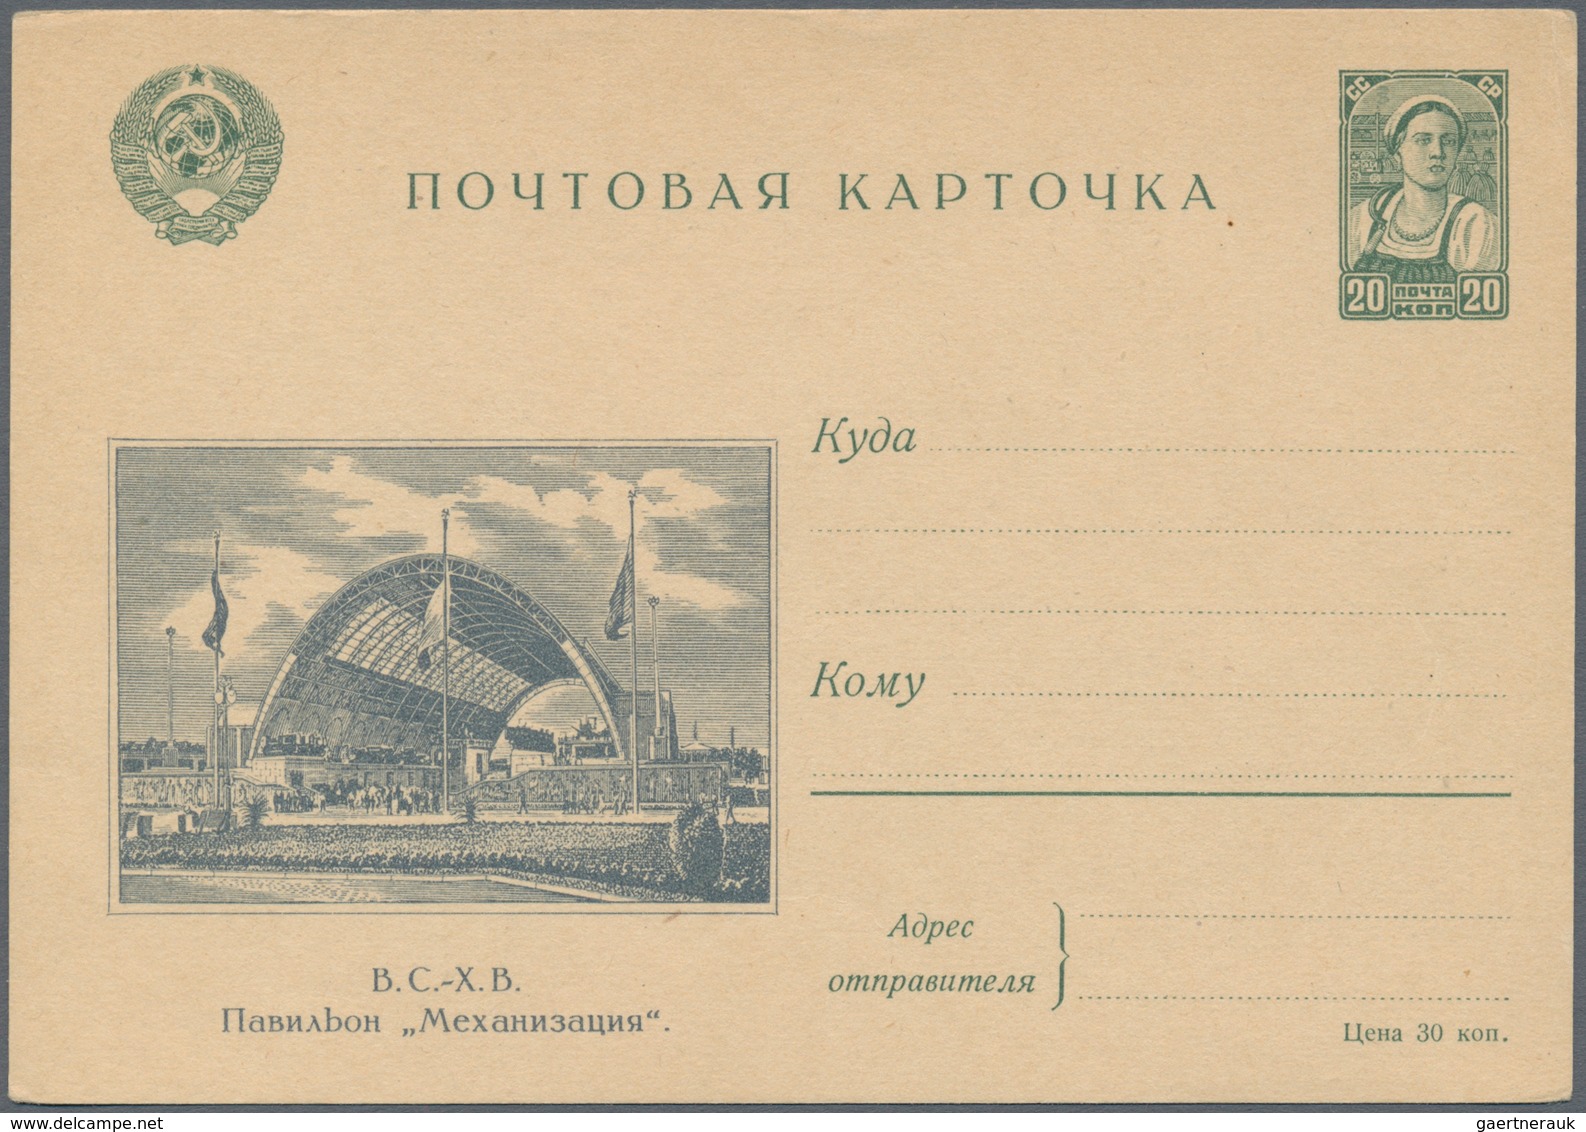 Sowjetunion - Ganzsachen: 1941, 10 unused picture postcards complete set Palace of Soviet and Agricu